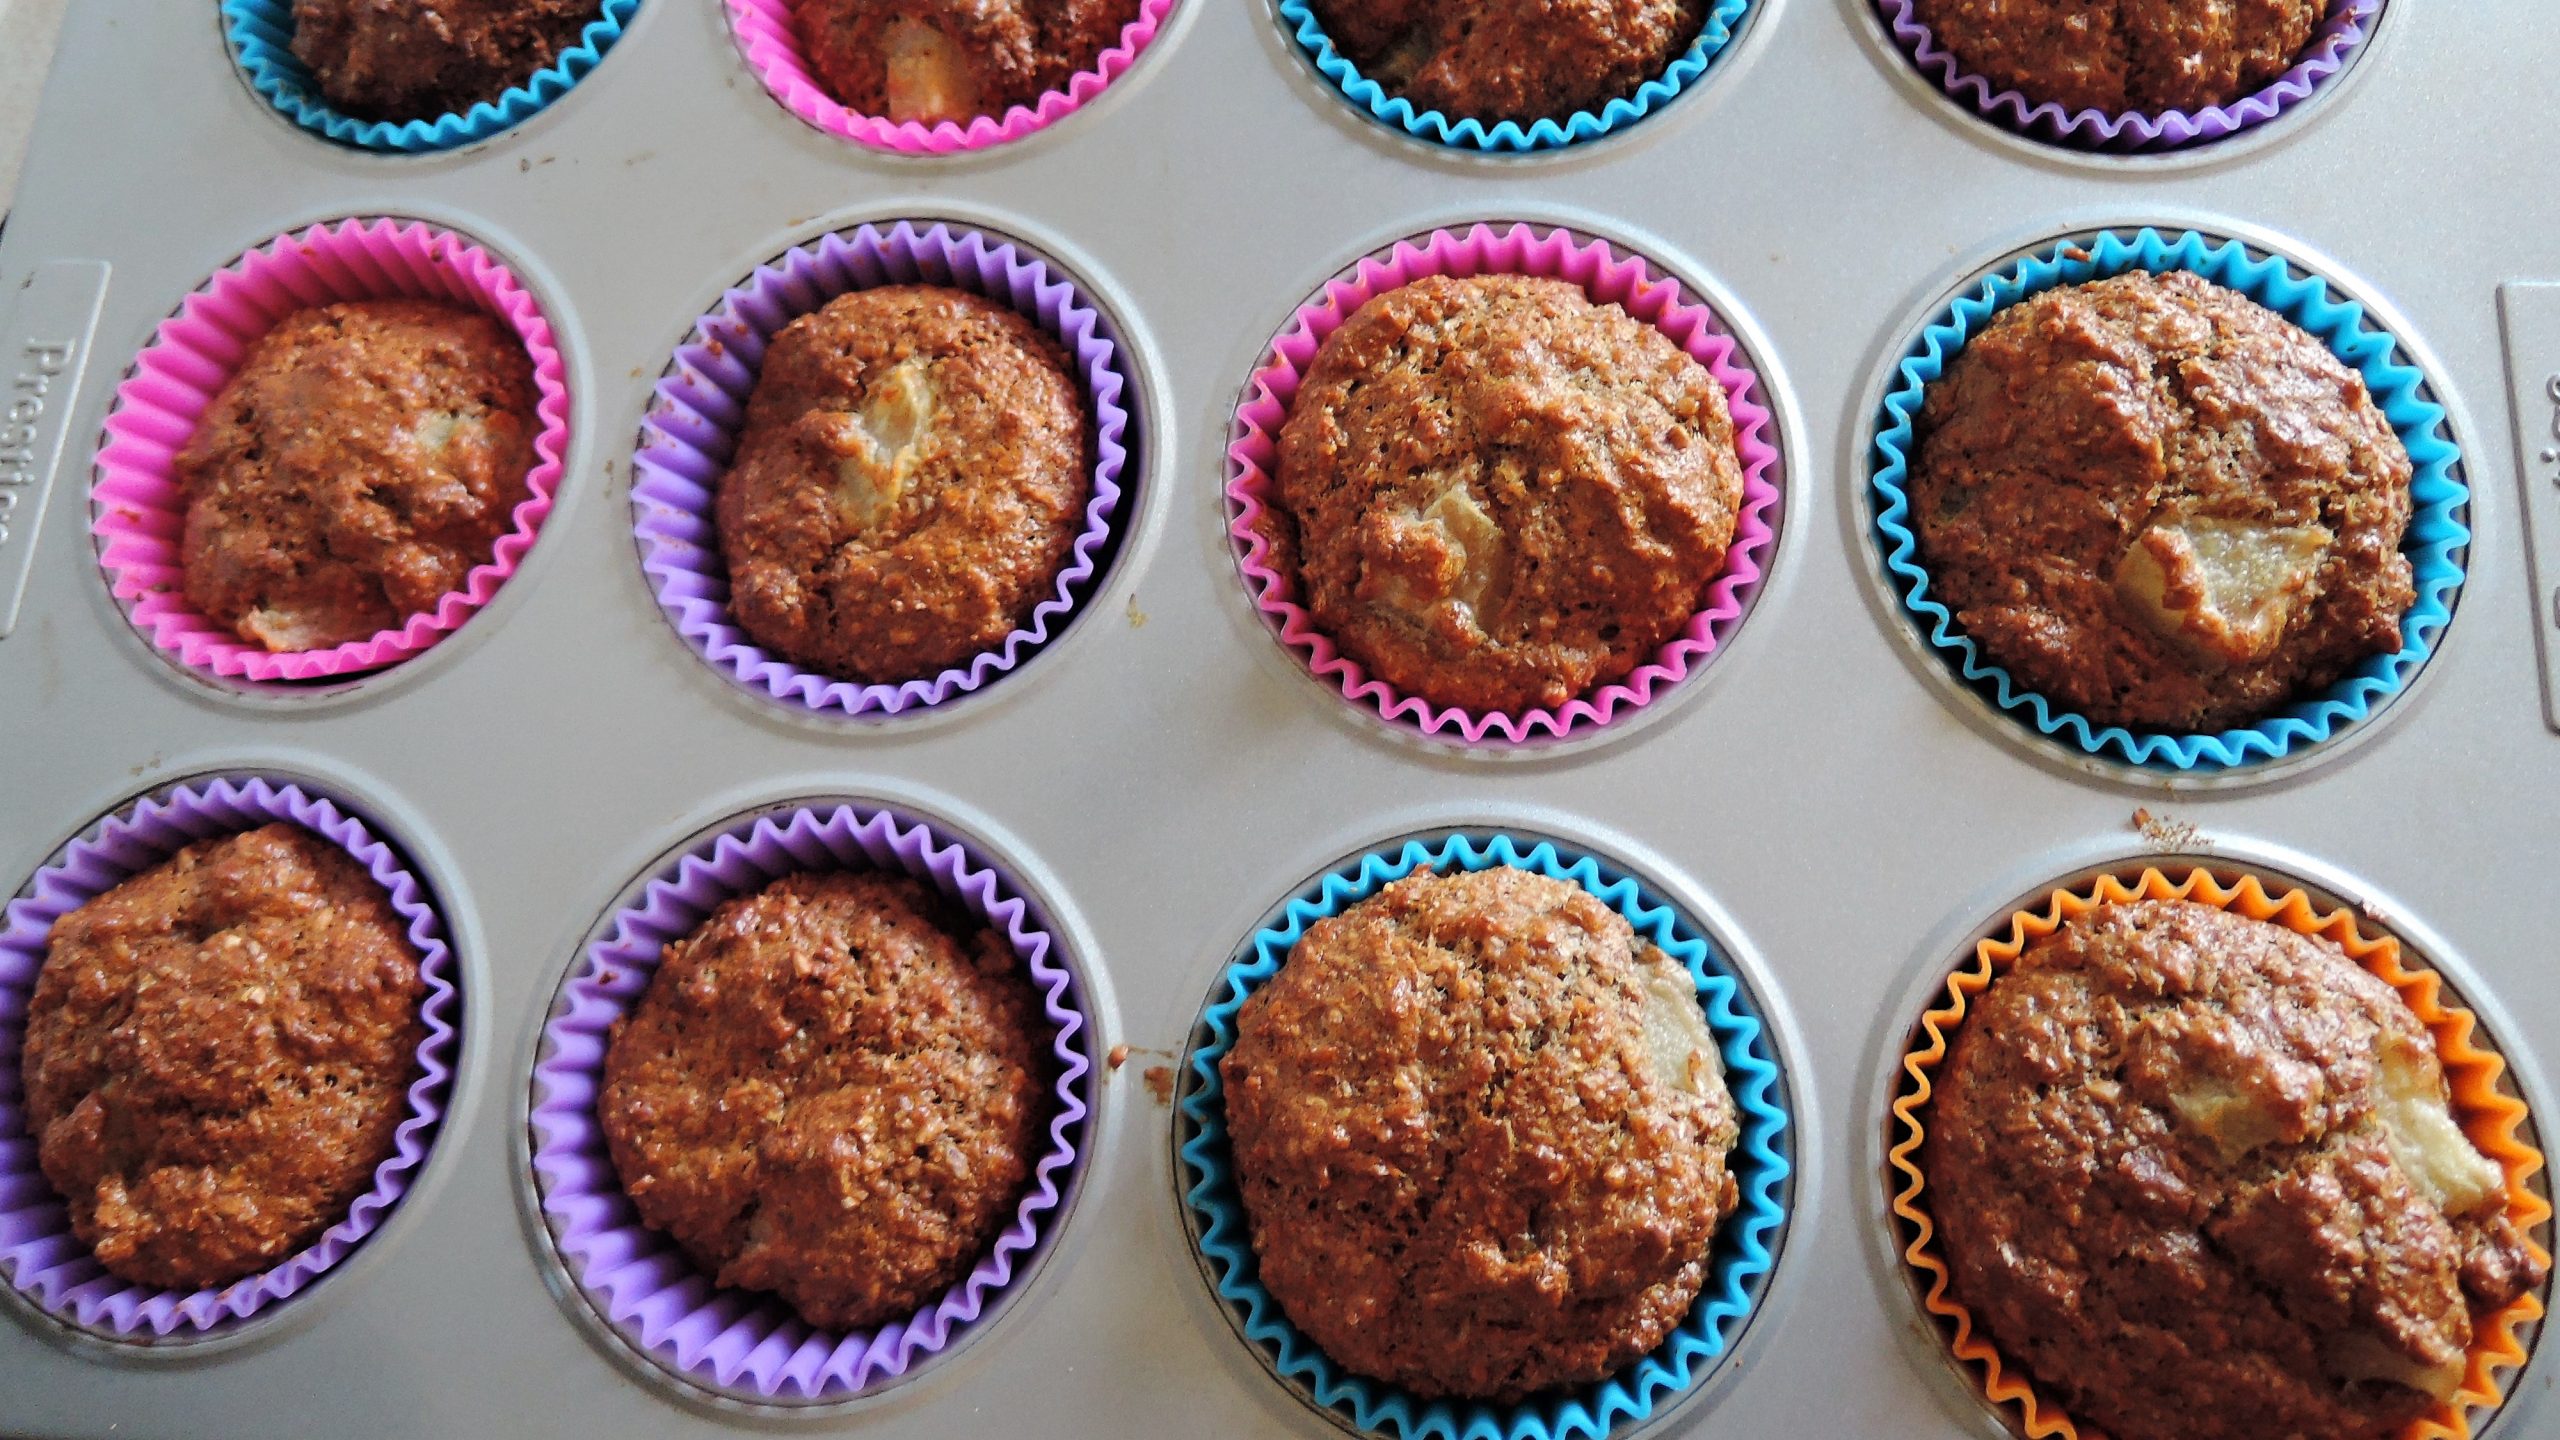 Spiced Pear and Bran Muffins